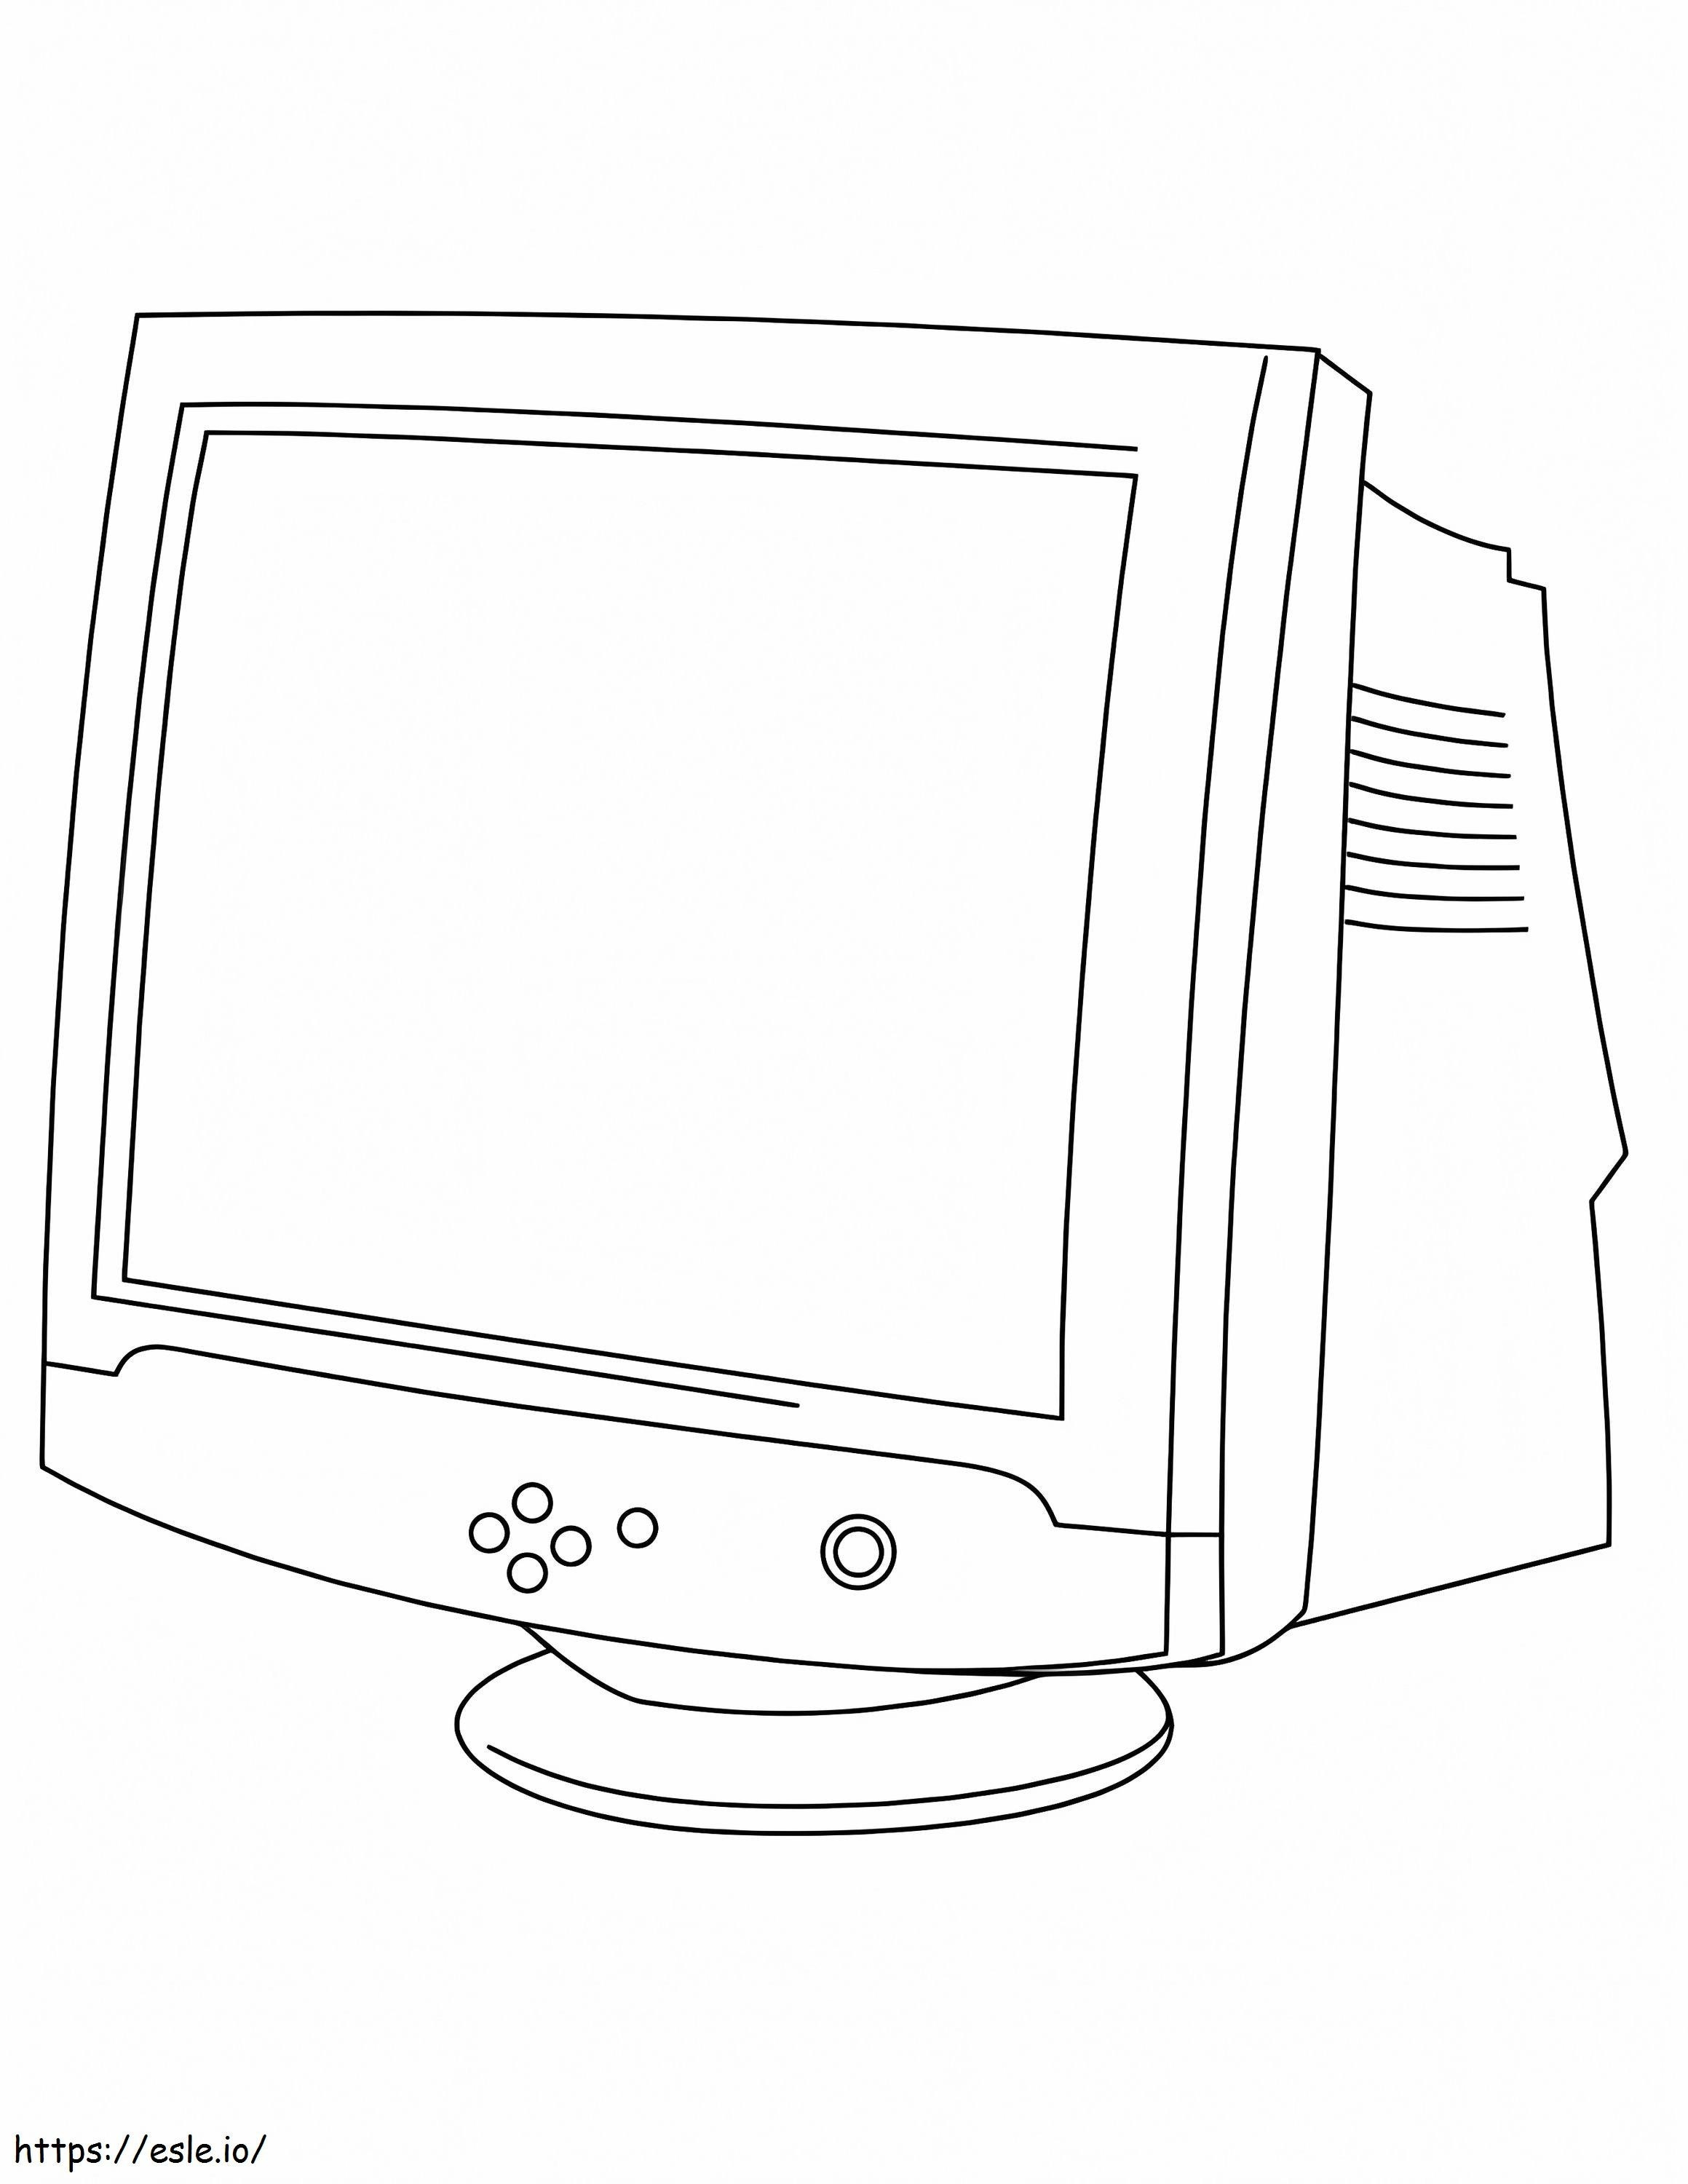 Computer Screen coloring page